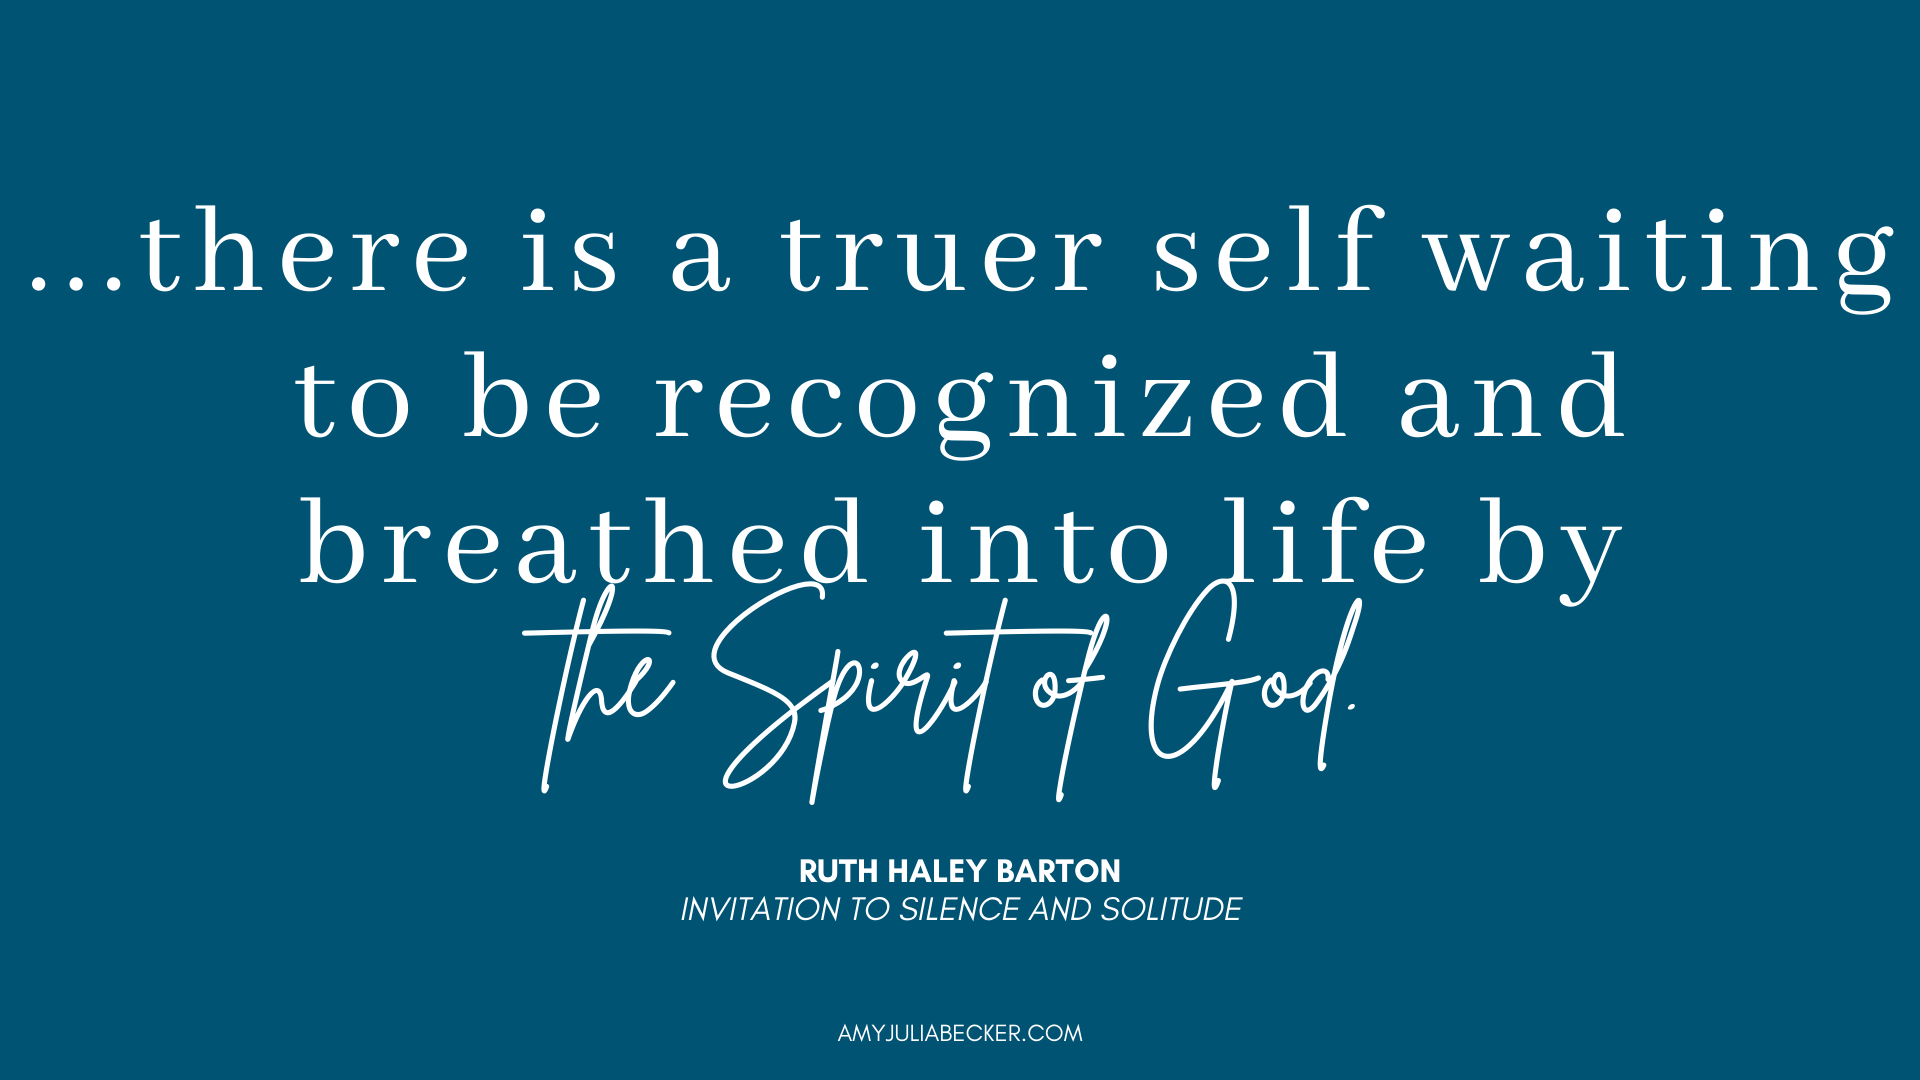 blue graphic with white text that says "...there is a truer self waiting to be recognized and breathed into life by the Spirit of God." --Ruth Haley Barton, Invitation to Silence and Solitude